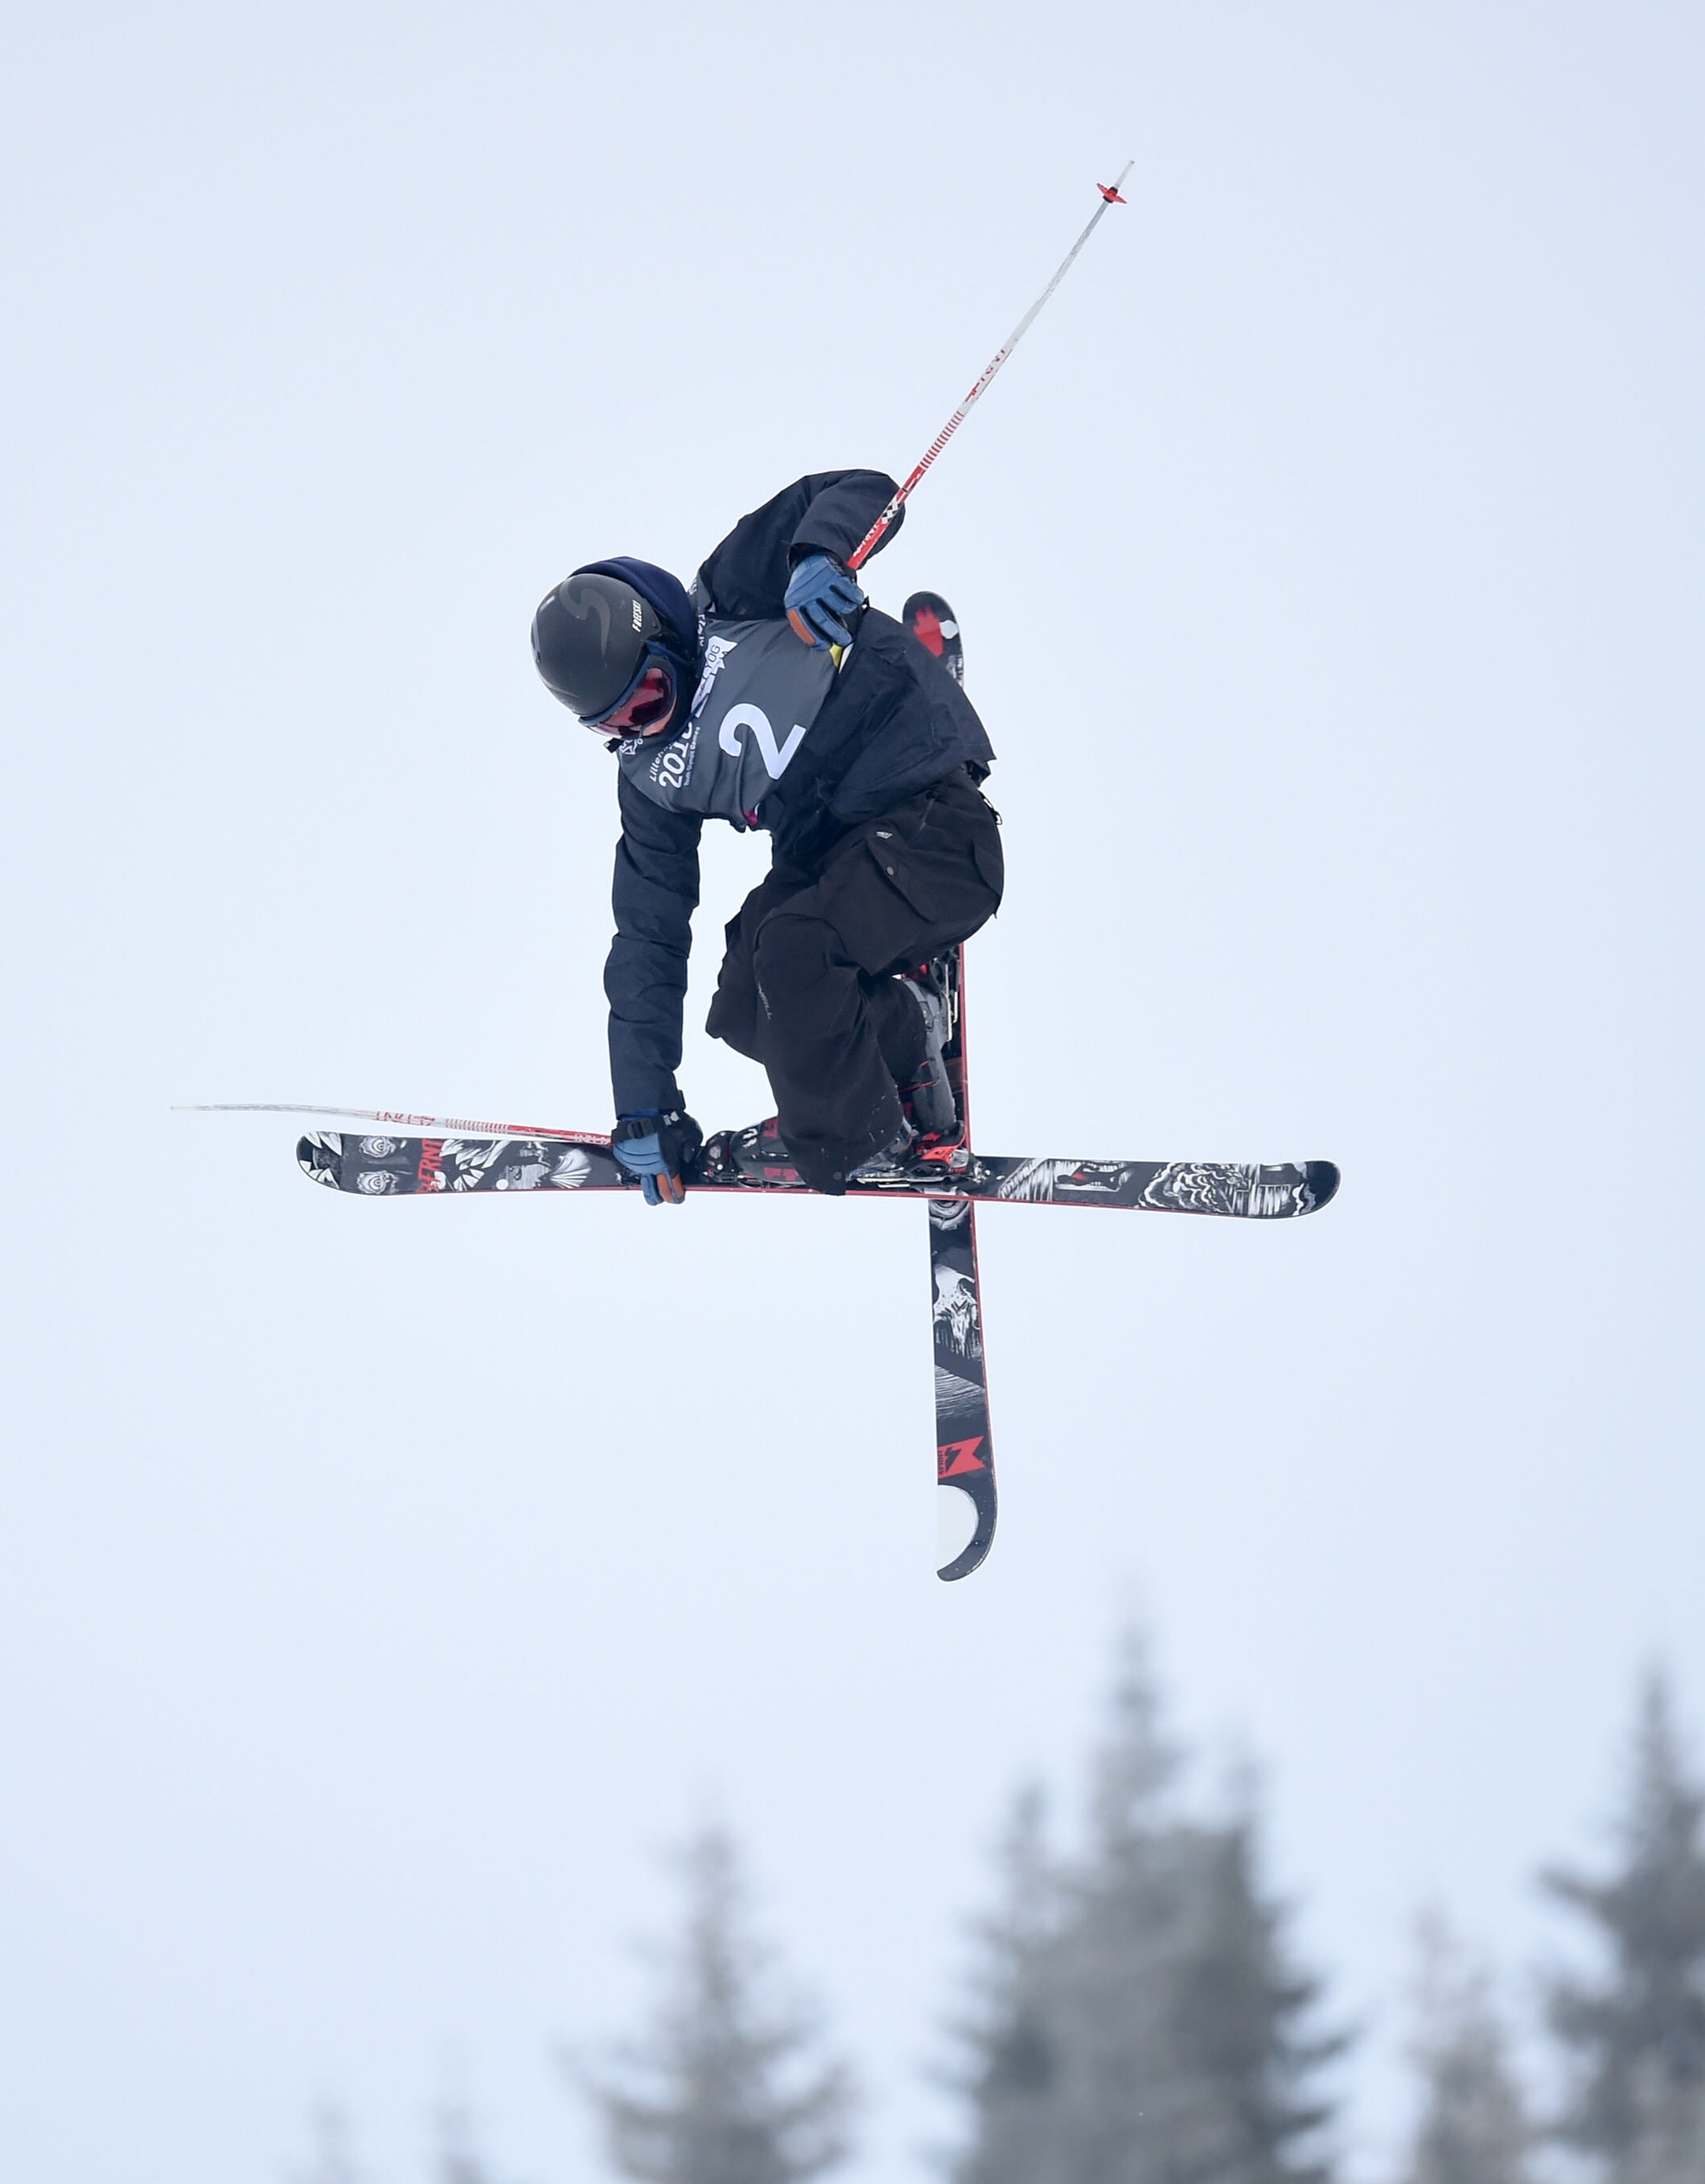 Norway's Birk Ruud scored the gold in the men's ski slopestyle event. Photo: YIS / IOC Bob Martin